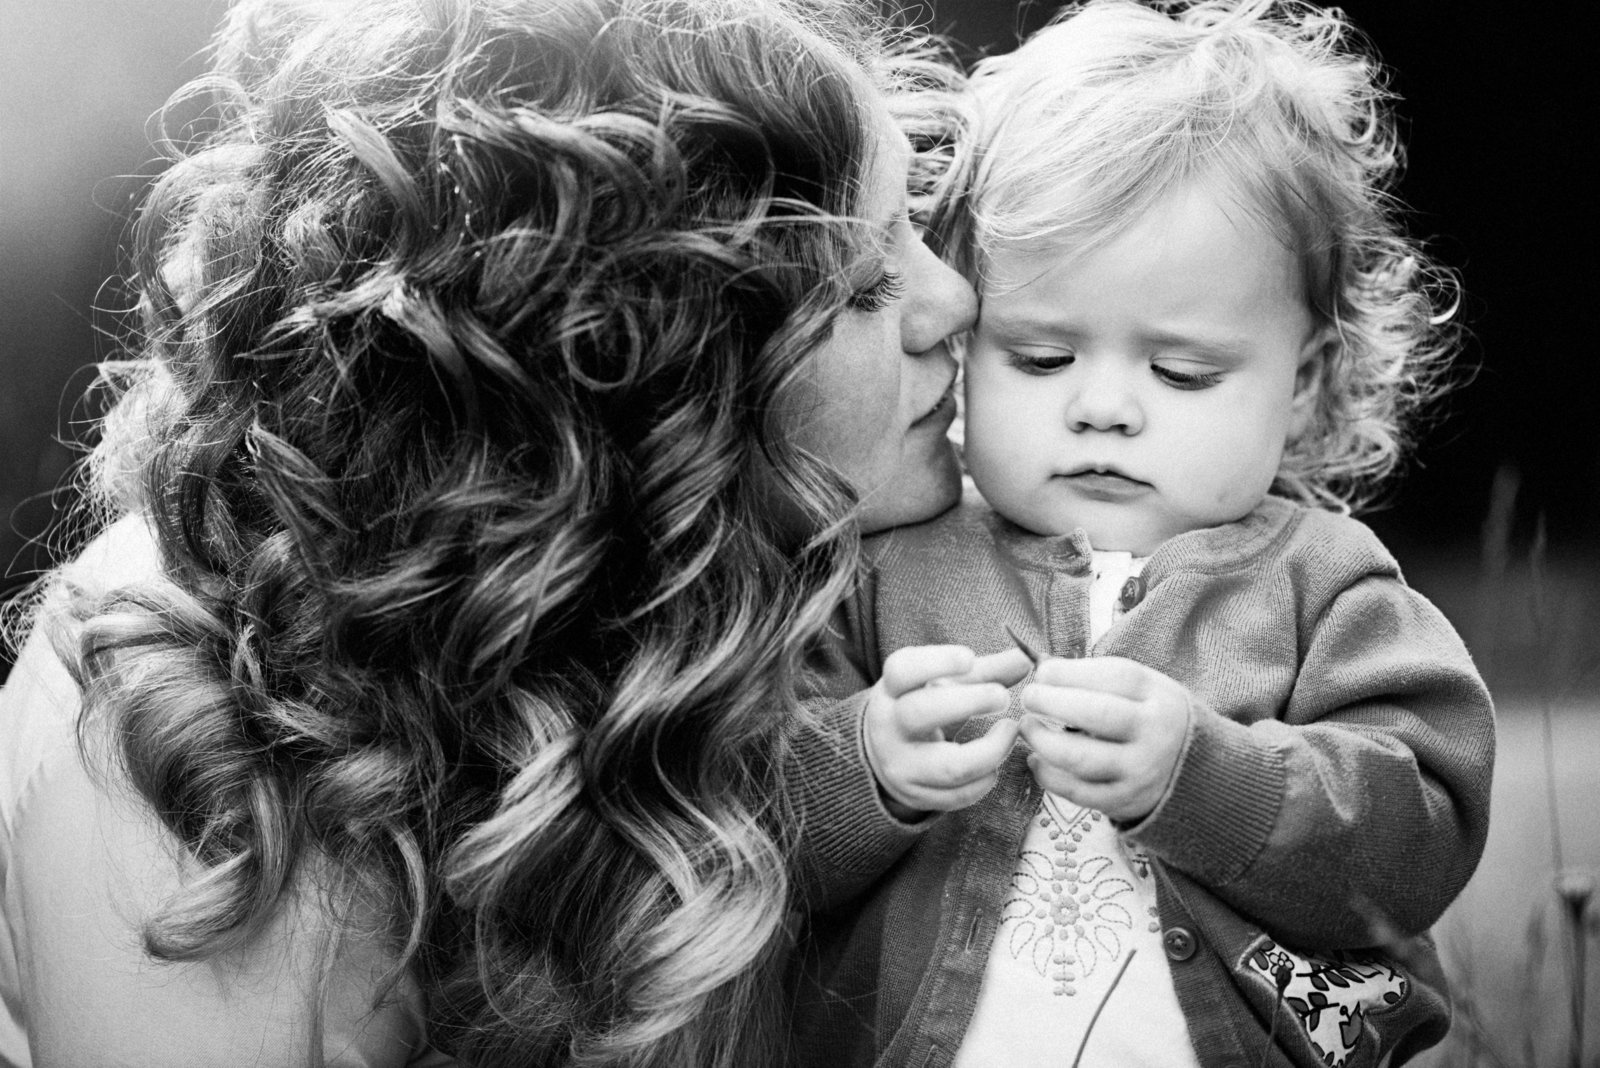 Black and White photo of a curly haired woman kissing her toddler daughter on the cheek.